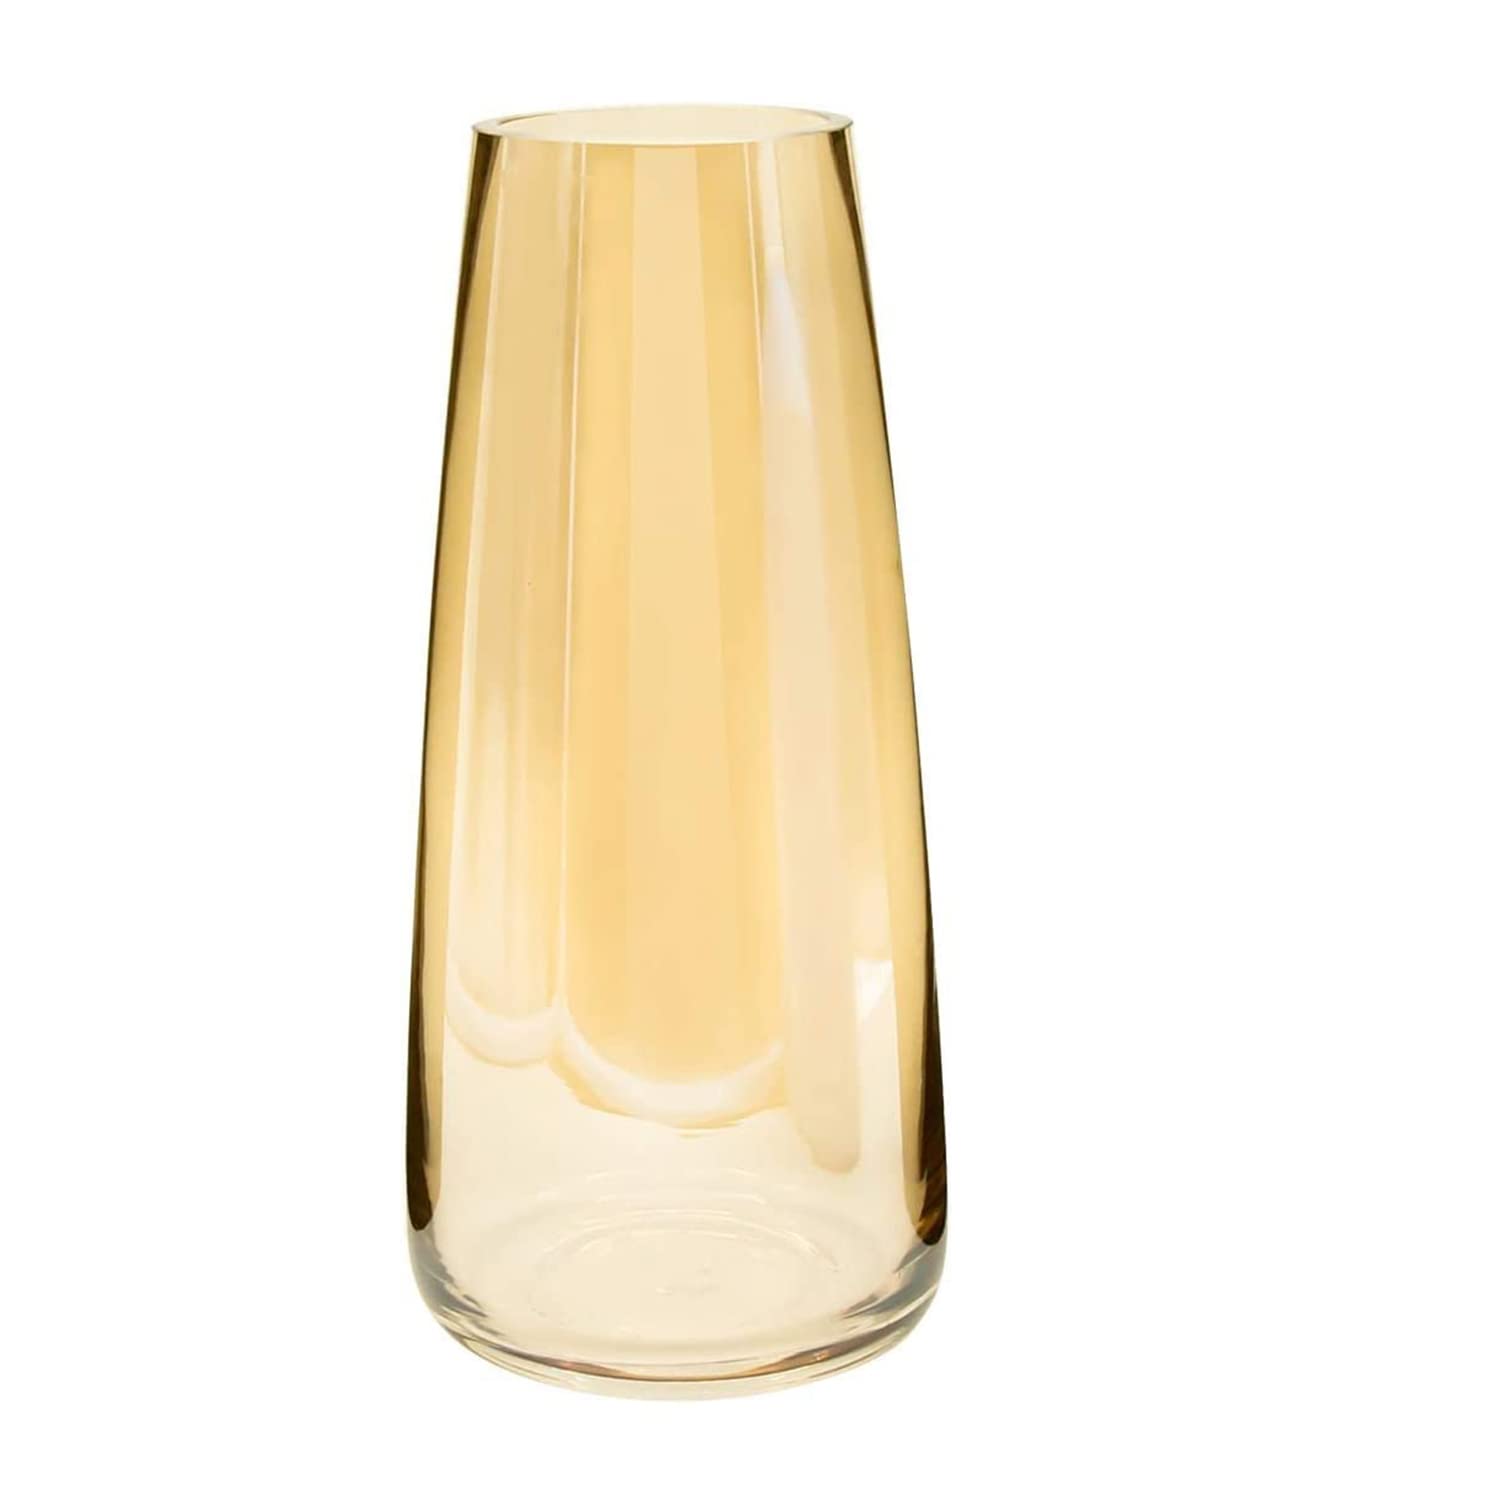 Perfect for Flowers Stylish Glass Vase Home & Office Decor (Gold, 22.8 cm x 6.3 cm x 7.6 cm)